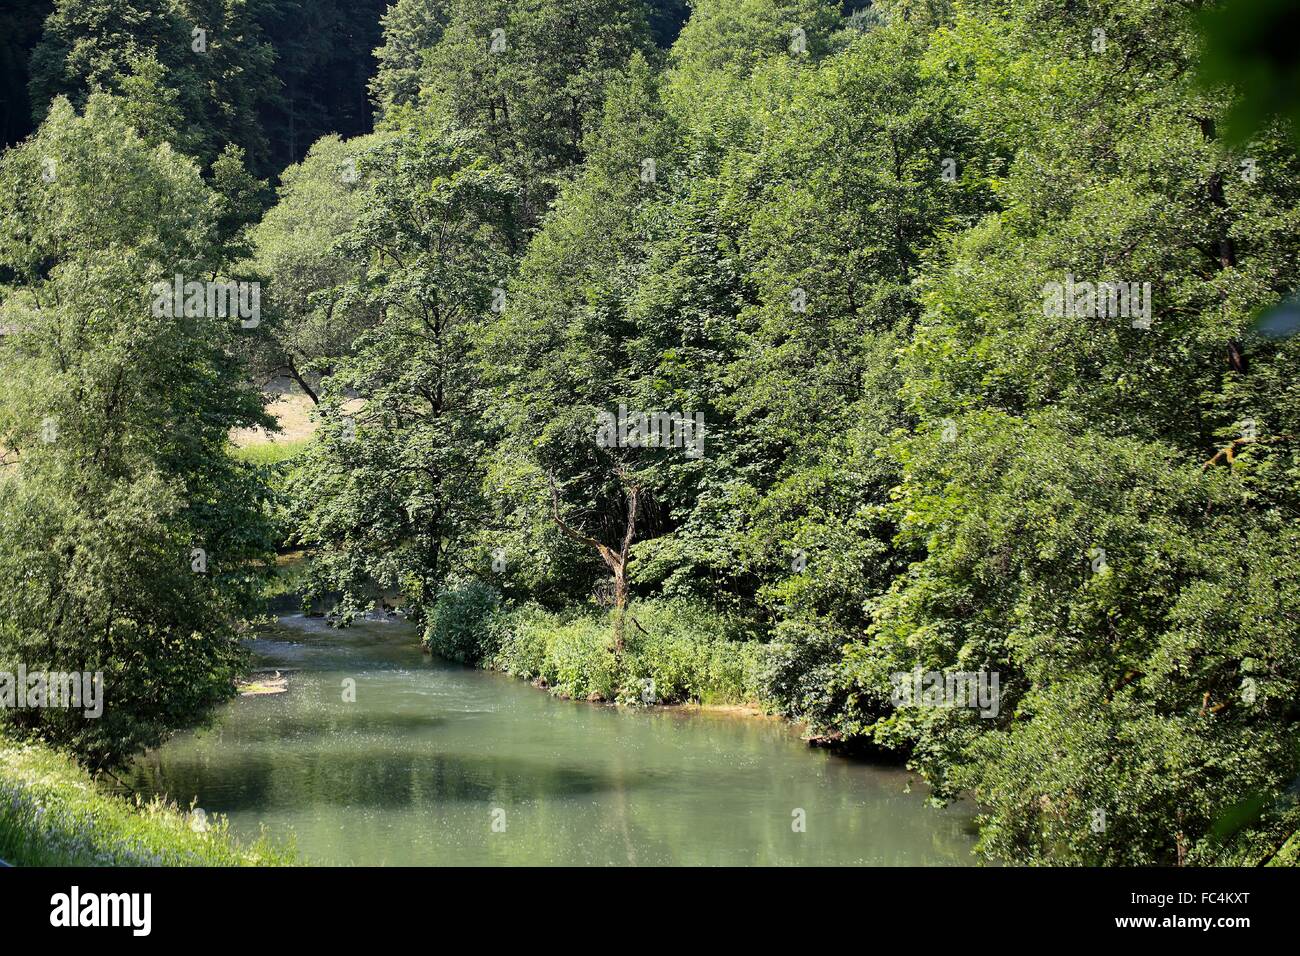 The Wiesent River in Frankonia. Stock Photo